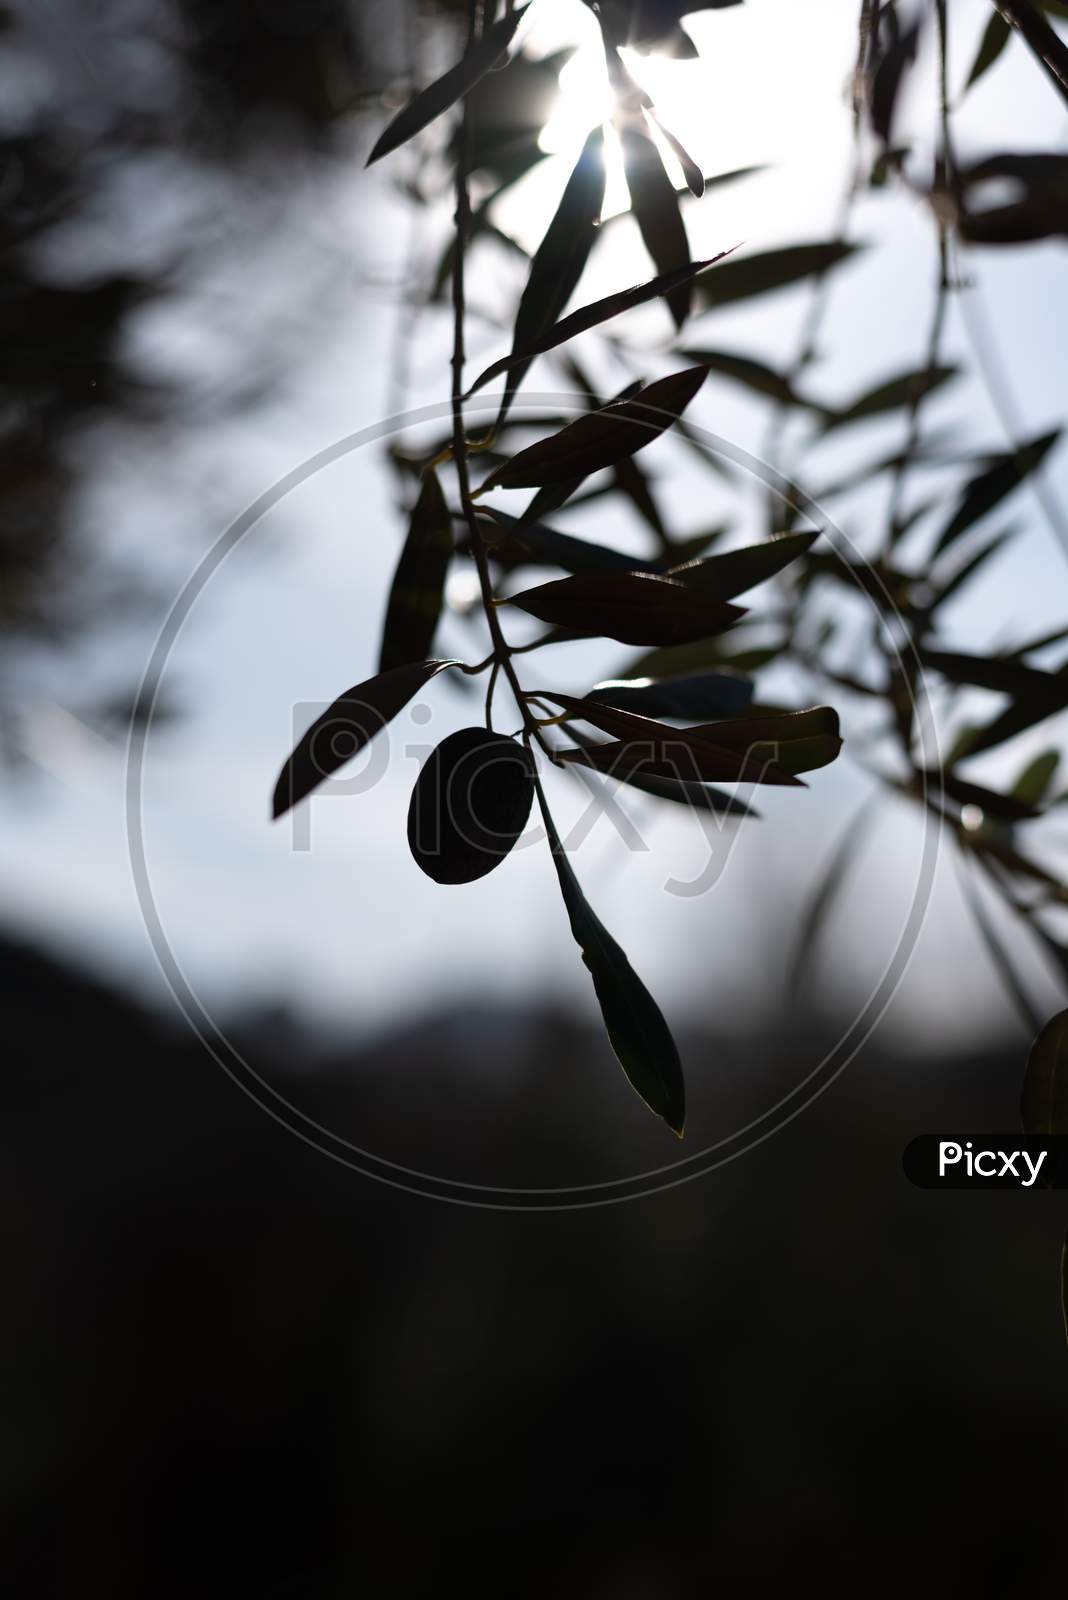 A Single Olive At The End Of A Branch Of A Centenary Olive Tree